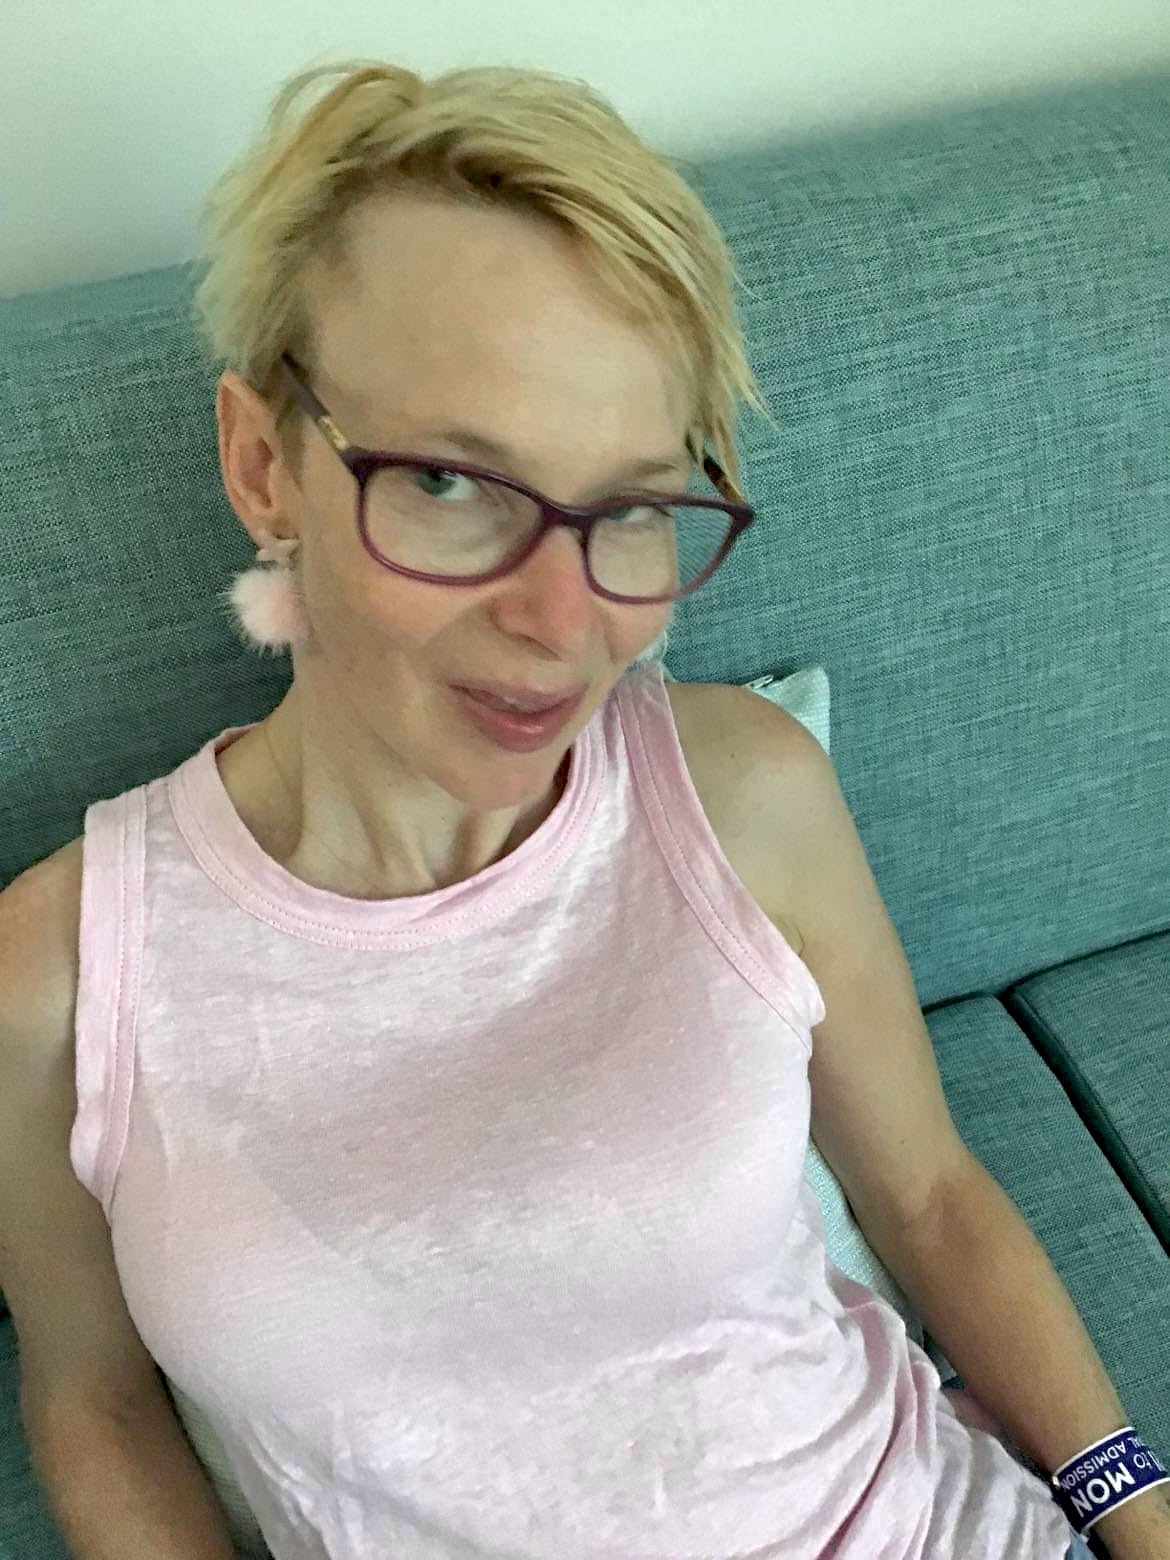 Fi Bridger at home in a pink top and pink earrings